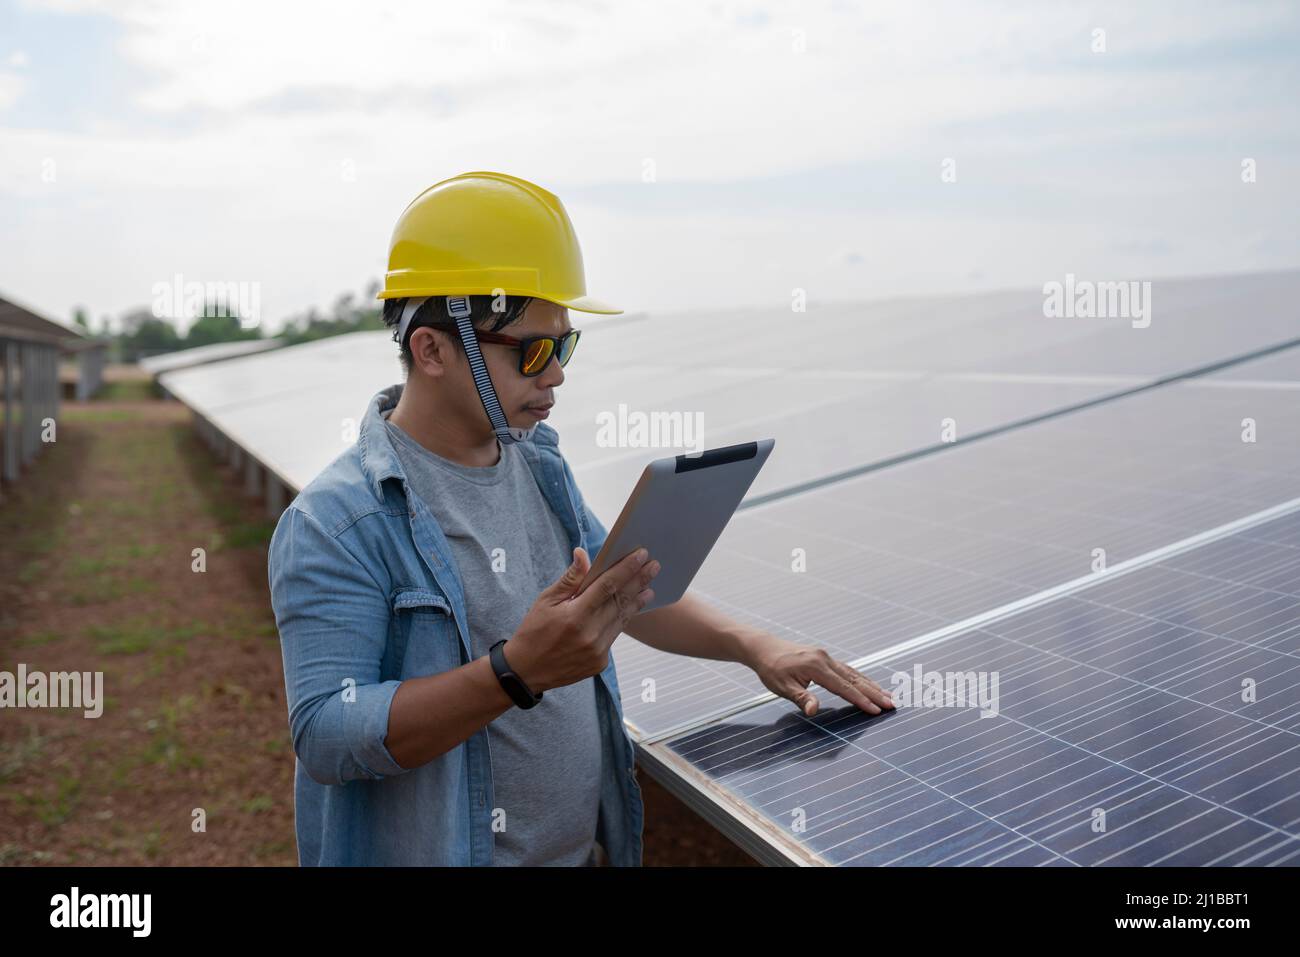 The technician uses a tablet to check the precision of solar energy to generate renewable energy. Stock Photo